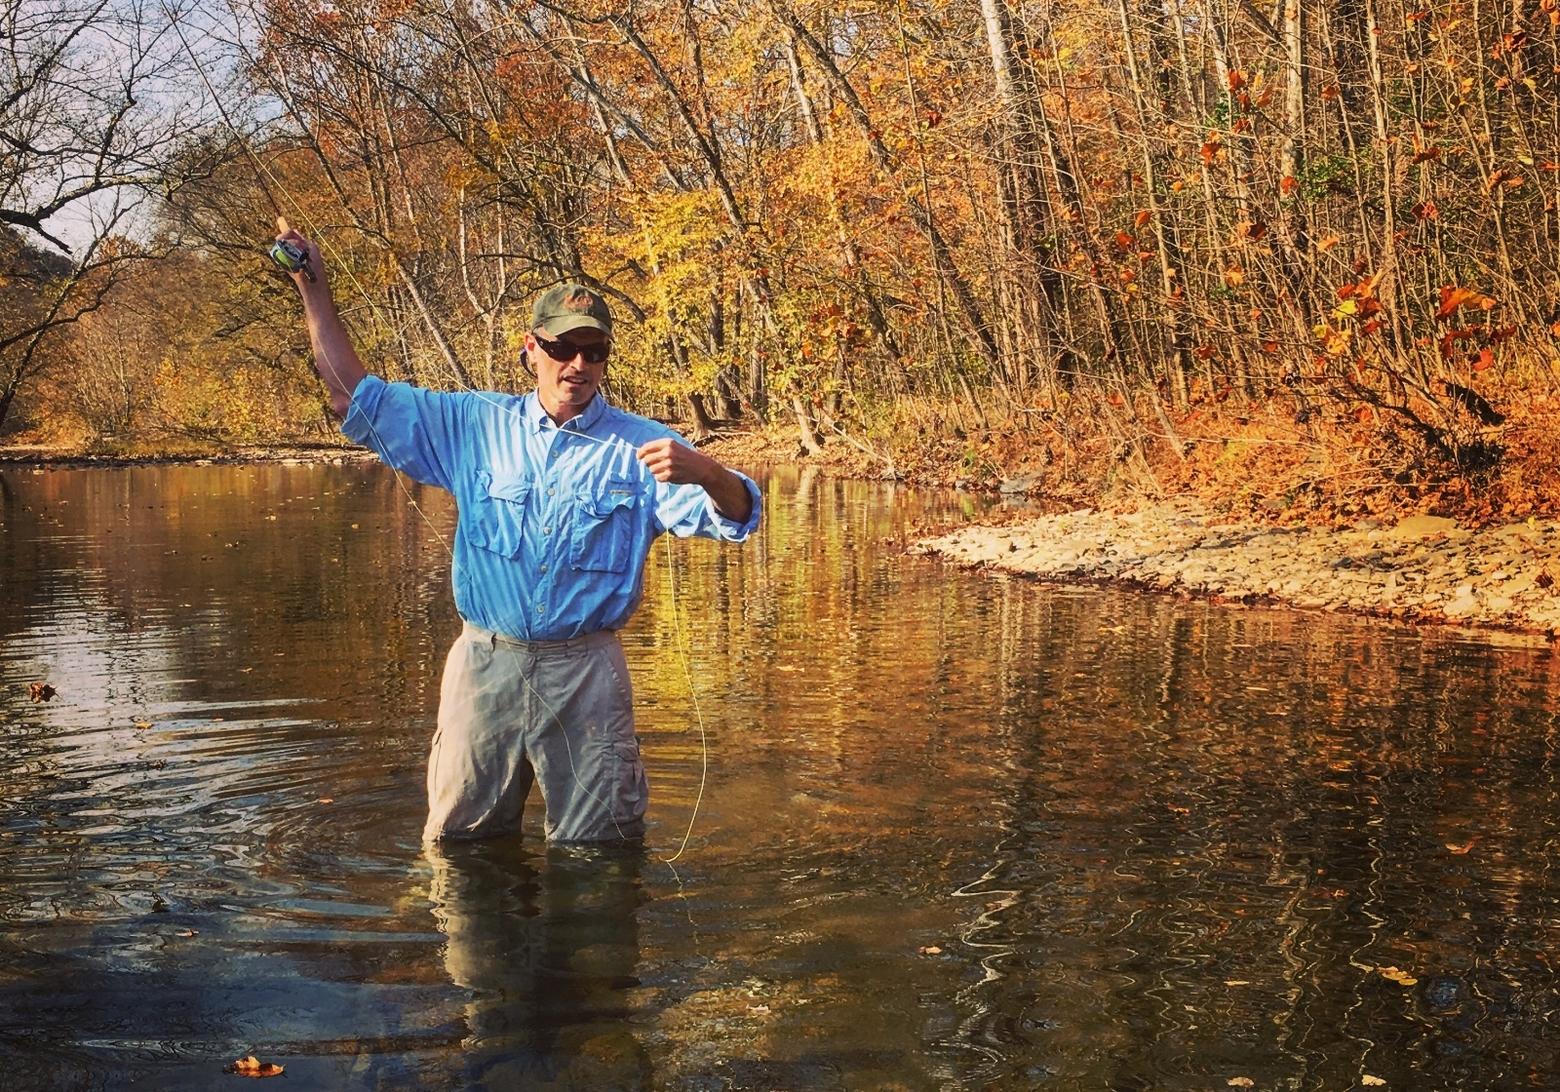 When Trout Unlimited president and CEO Chris Wood isn't meeting with the faithful scattered across the country, he's usually attending his kids' sporting events. And when he's not doing that, he steals away time on rivers wherever he finds them, like this day of chasing brook trout.  People who love the outdoors need to weigh in  on conservation issues or they risk losing the things they love, he says.